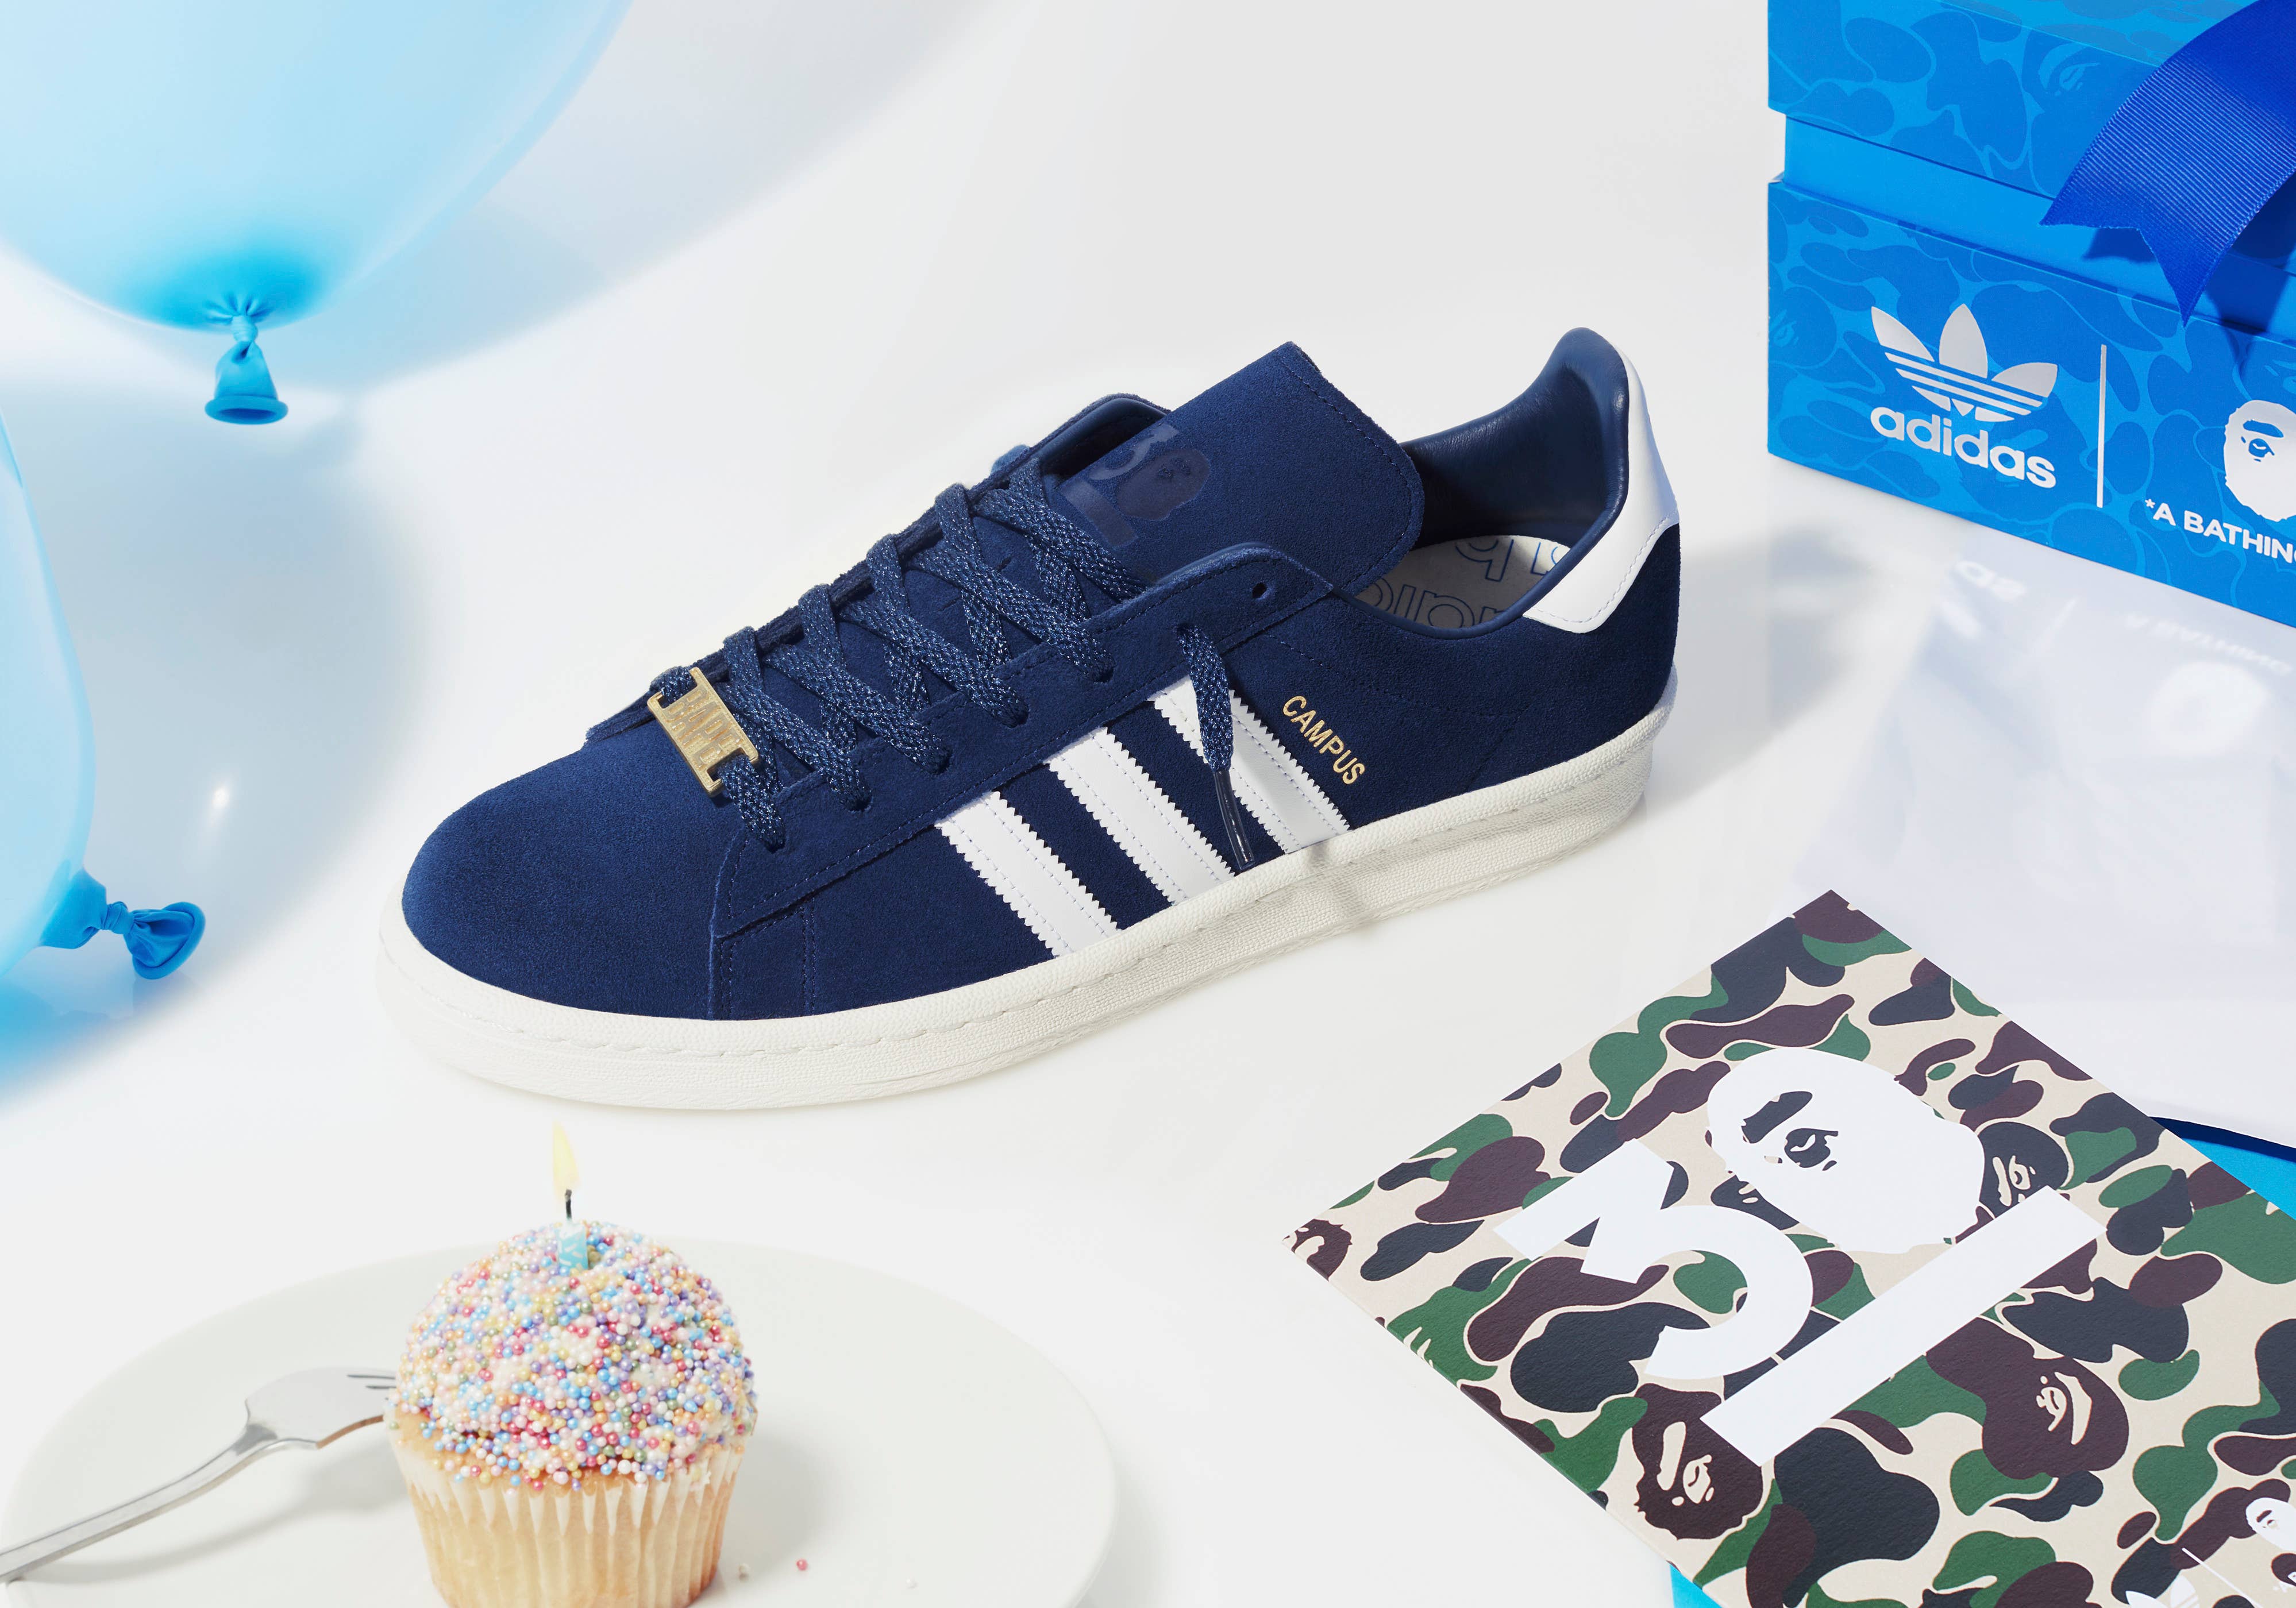 BAPE and adidas Originals are collaborating once again on a new